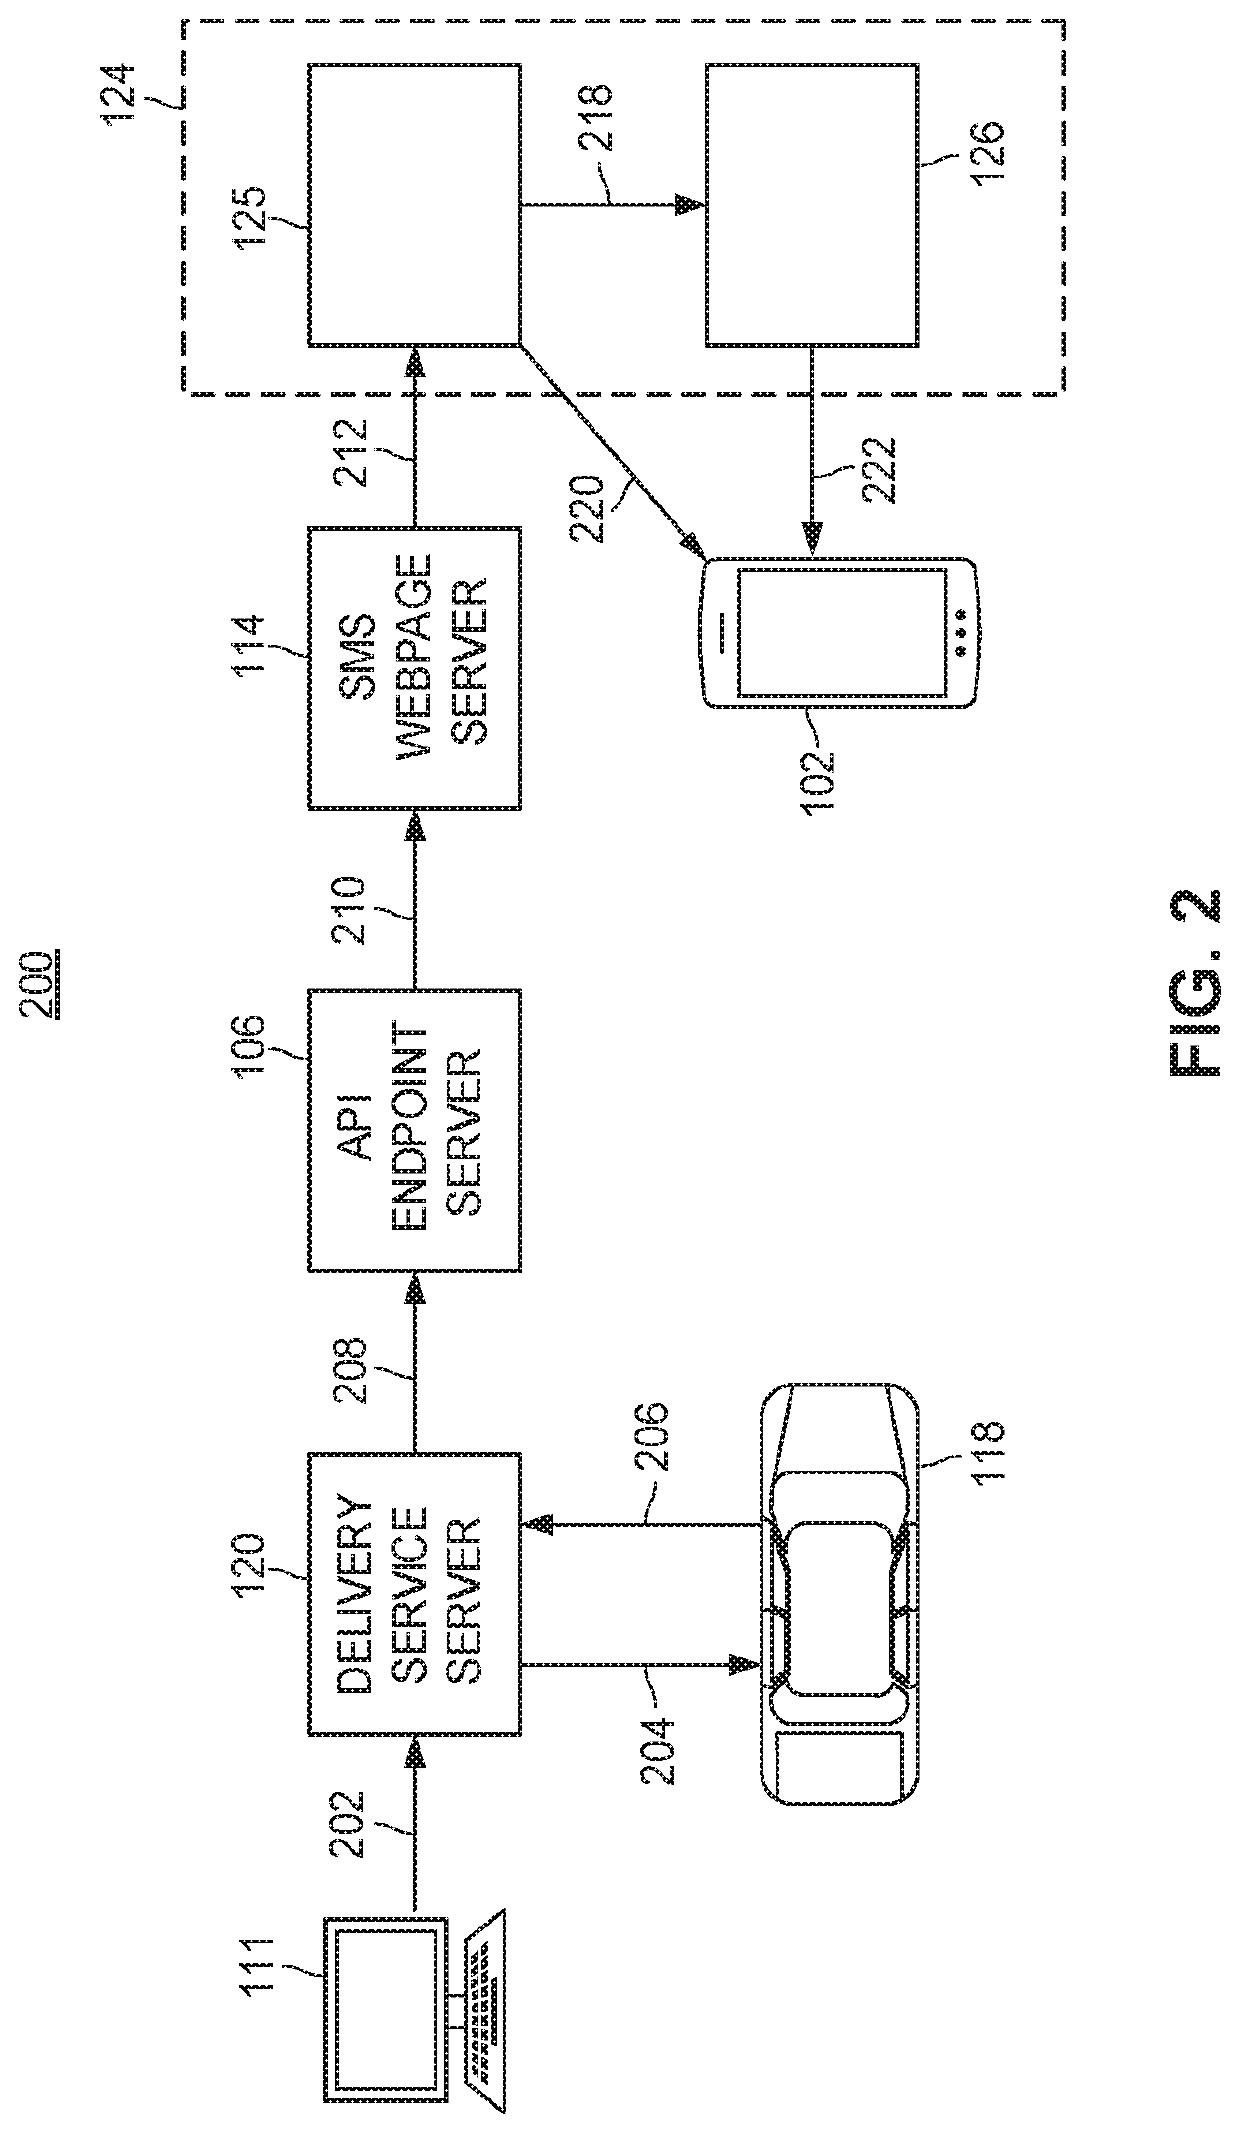 Push-based communications systems and methods for transmitting push-based communications associated with products moving geographically